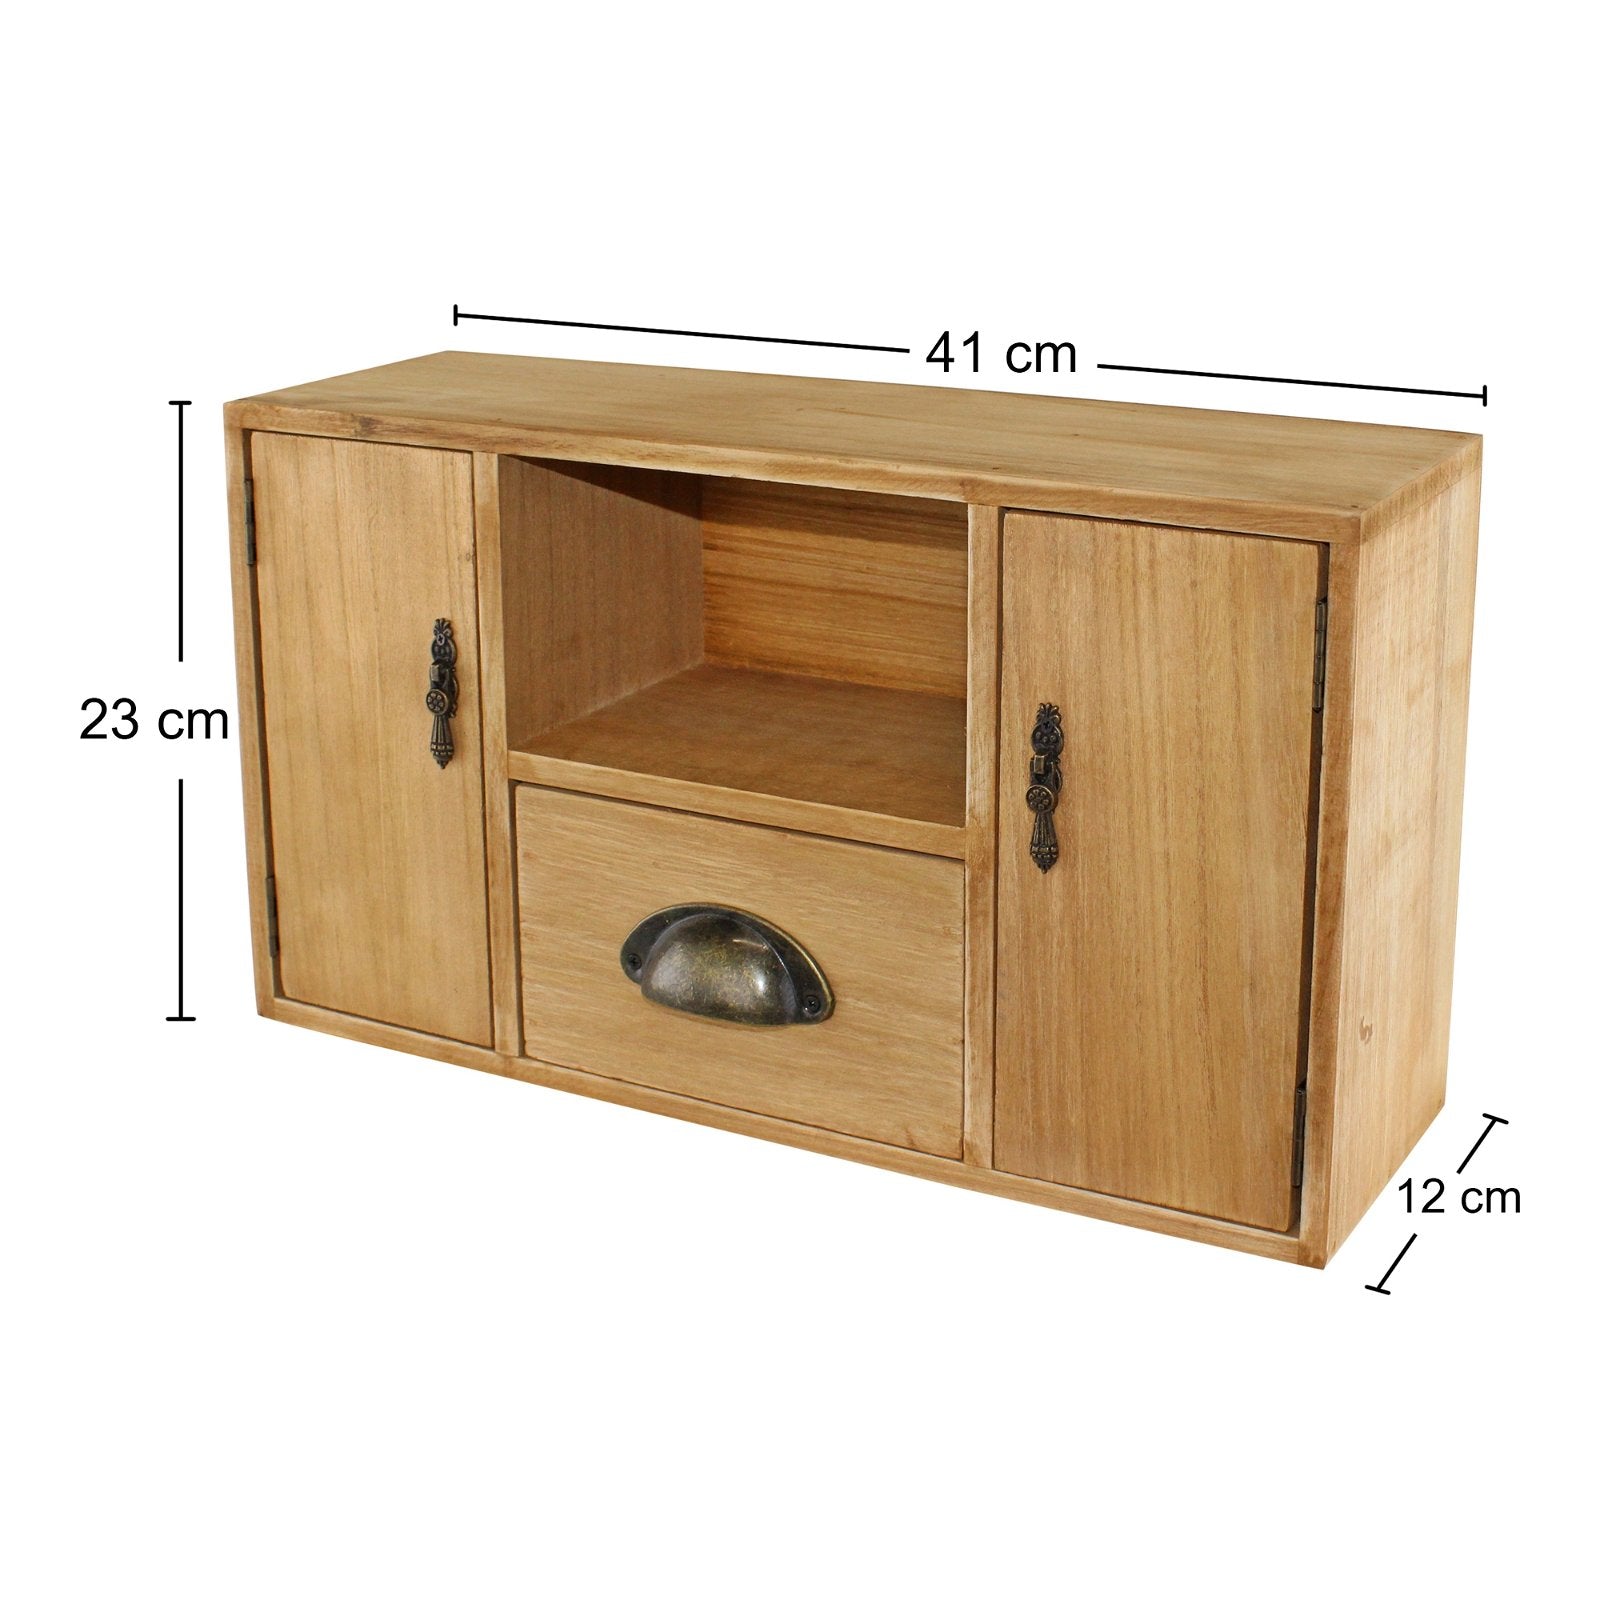 Small Wooden Cabinet with Cupboards, Drawer and Shelf